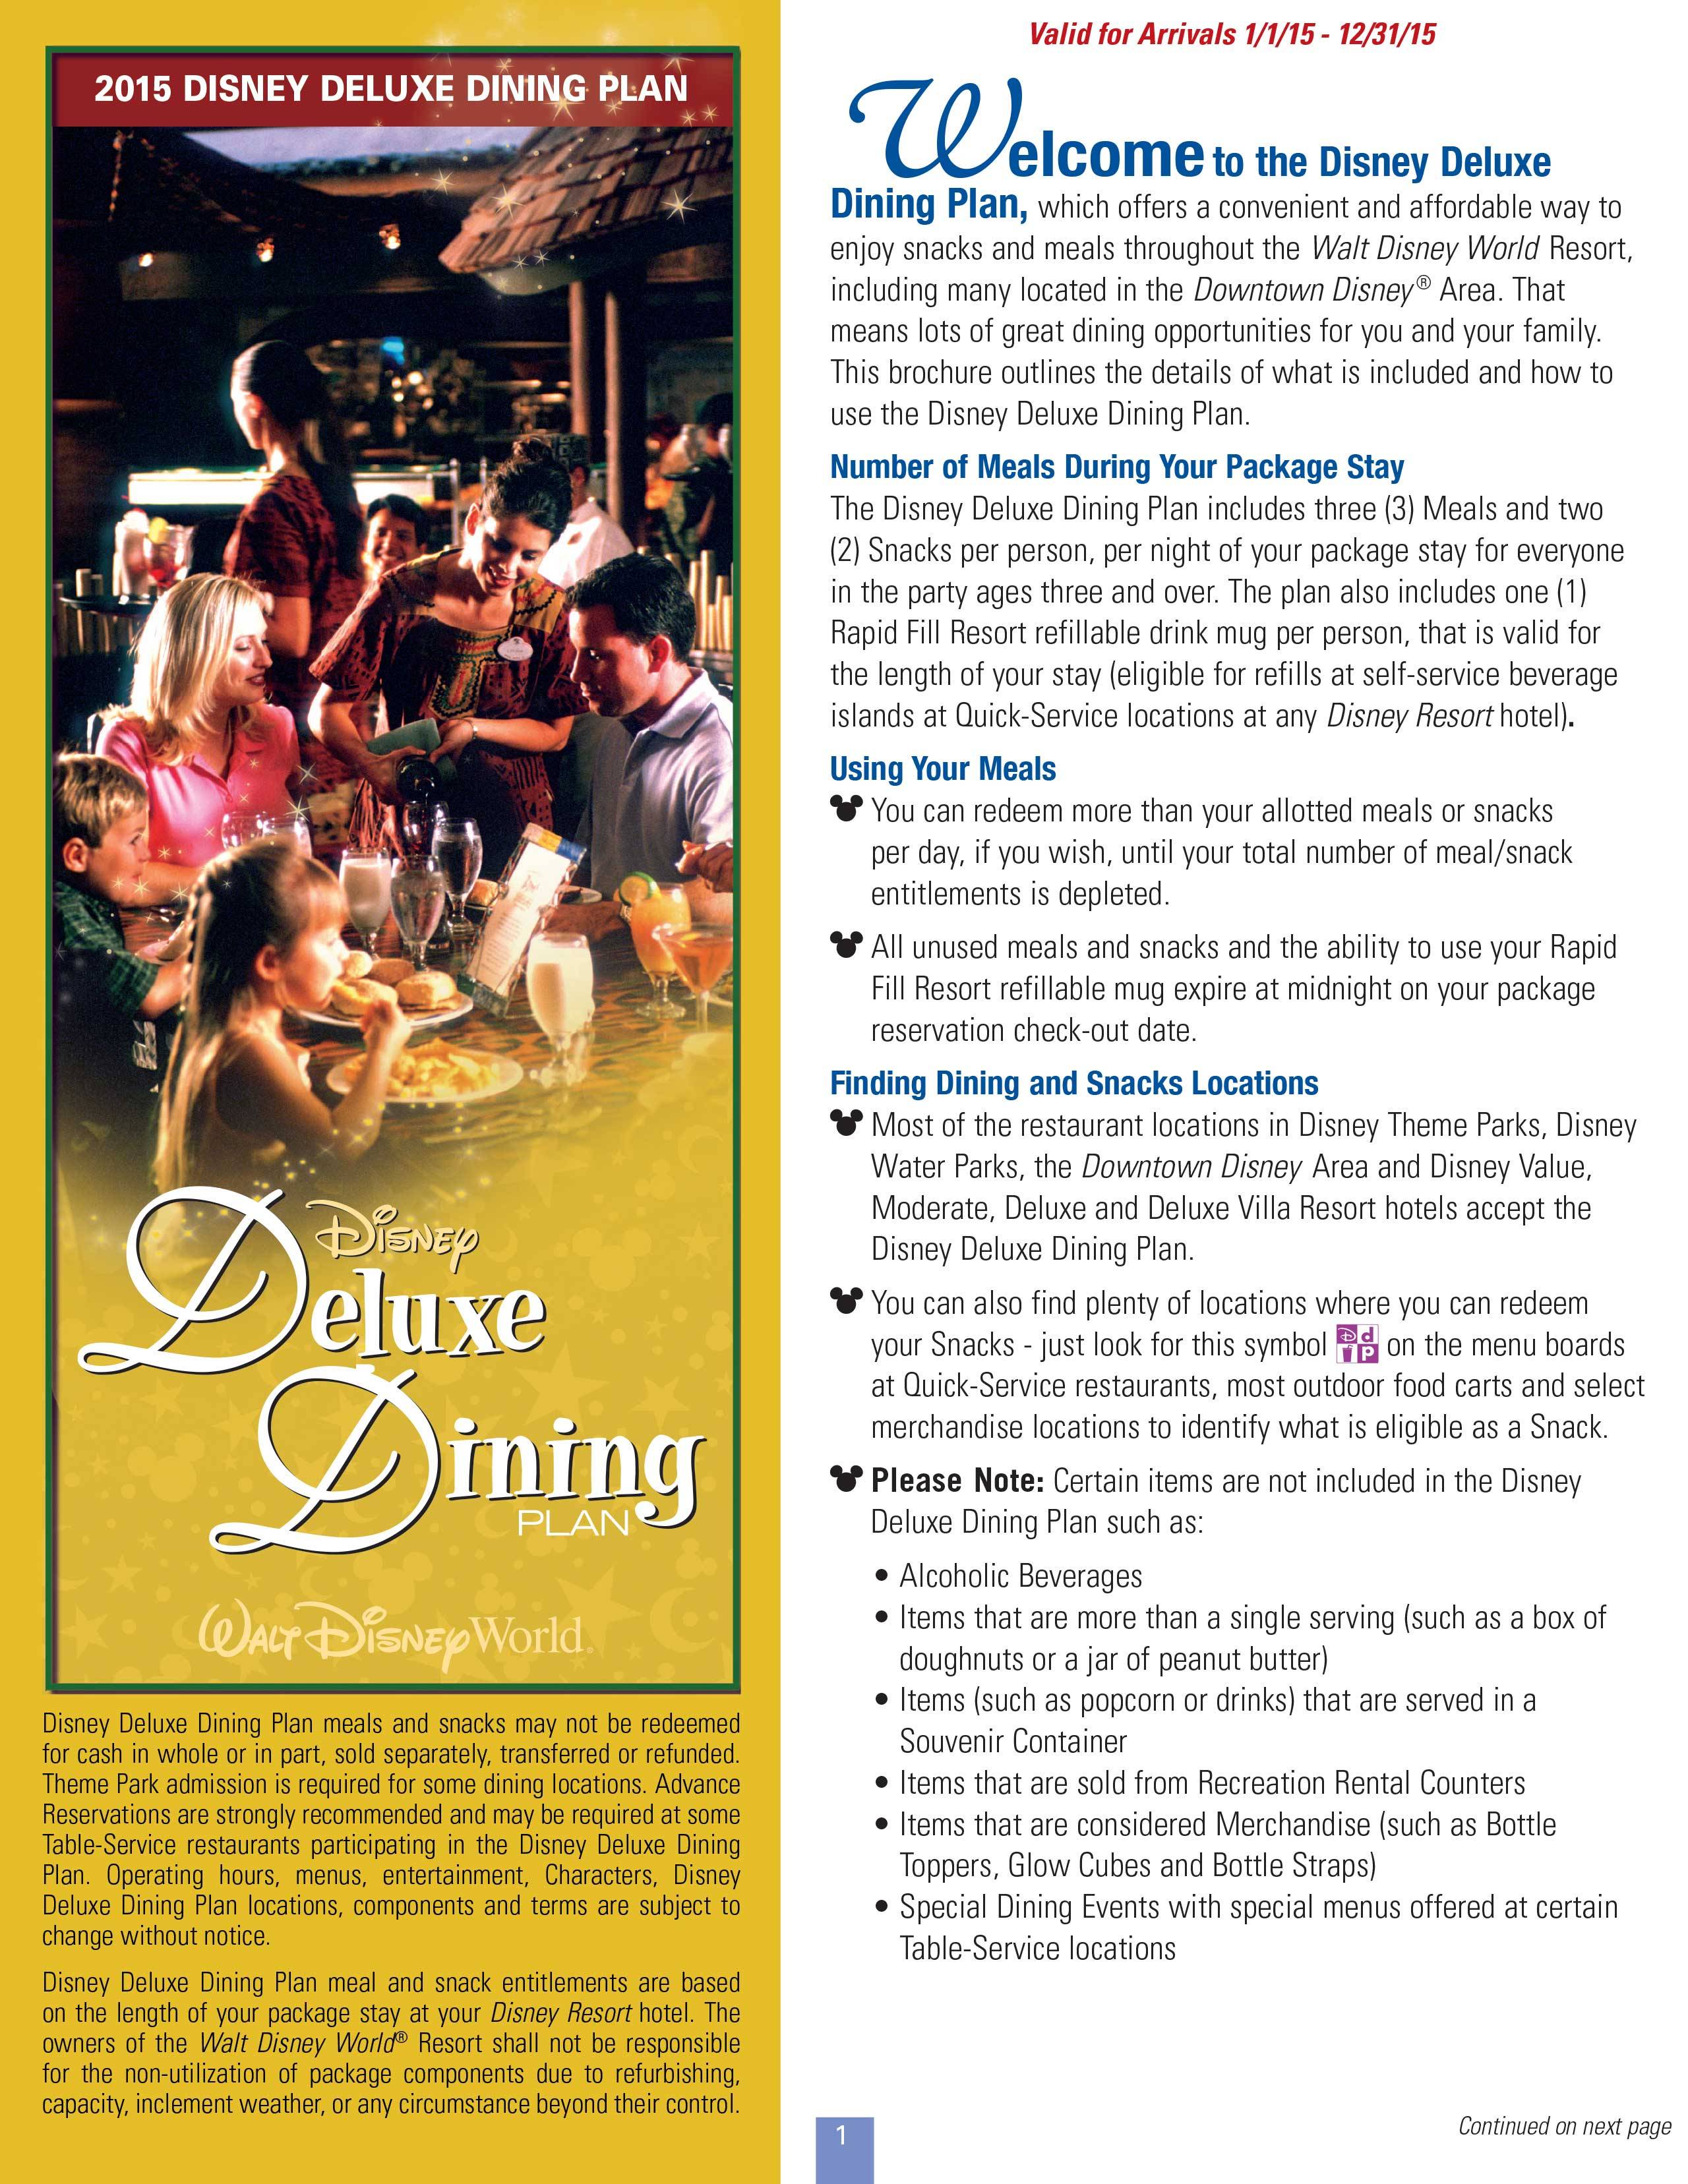 2015 Disney Deluxe Dining Plan brochure - Page 1